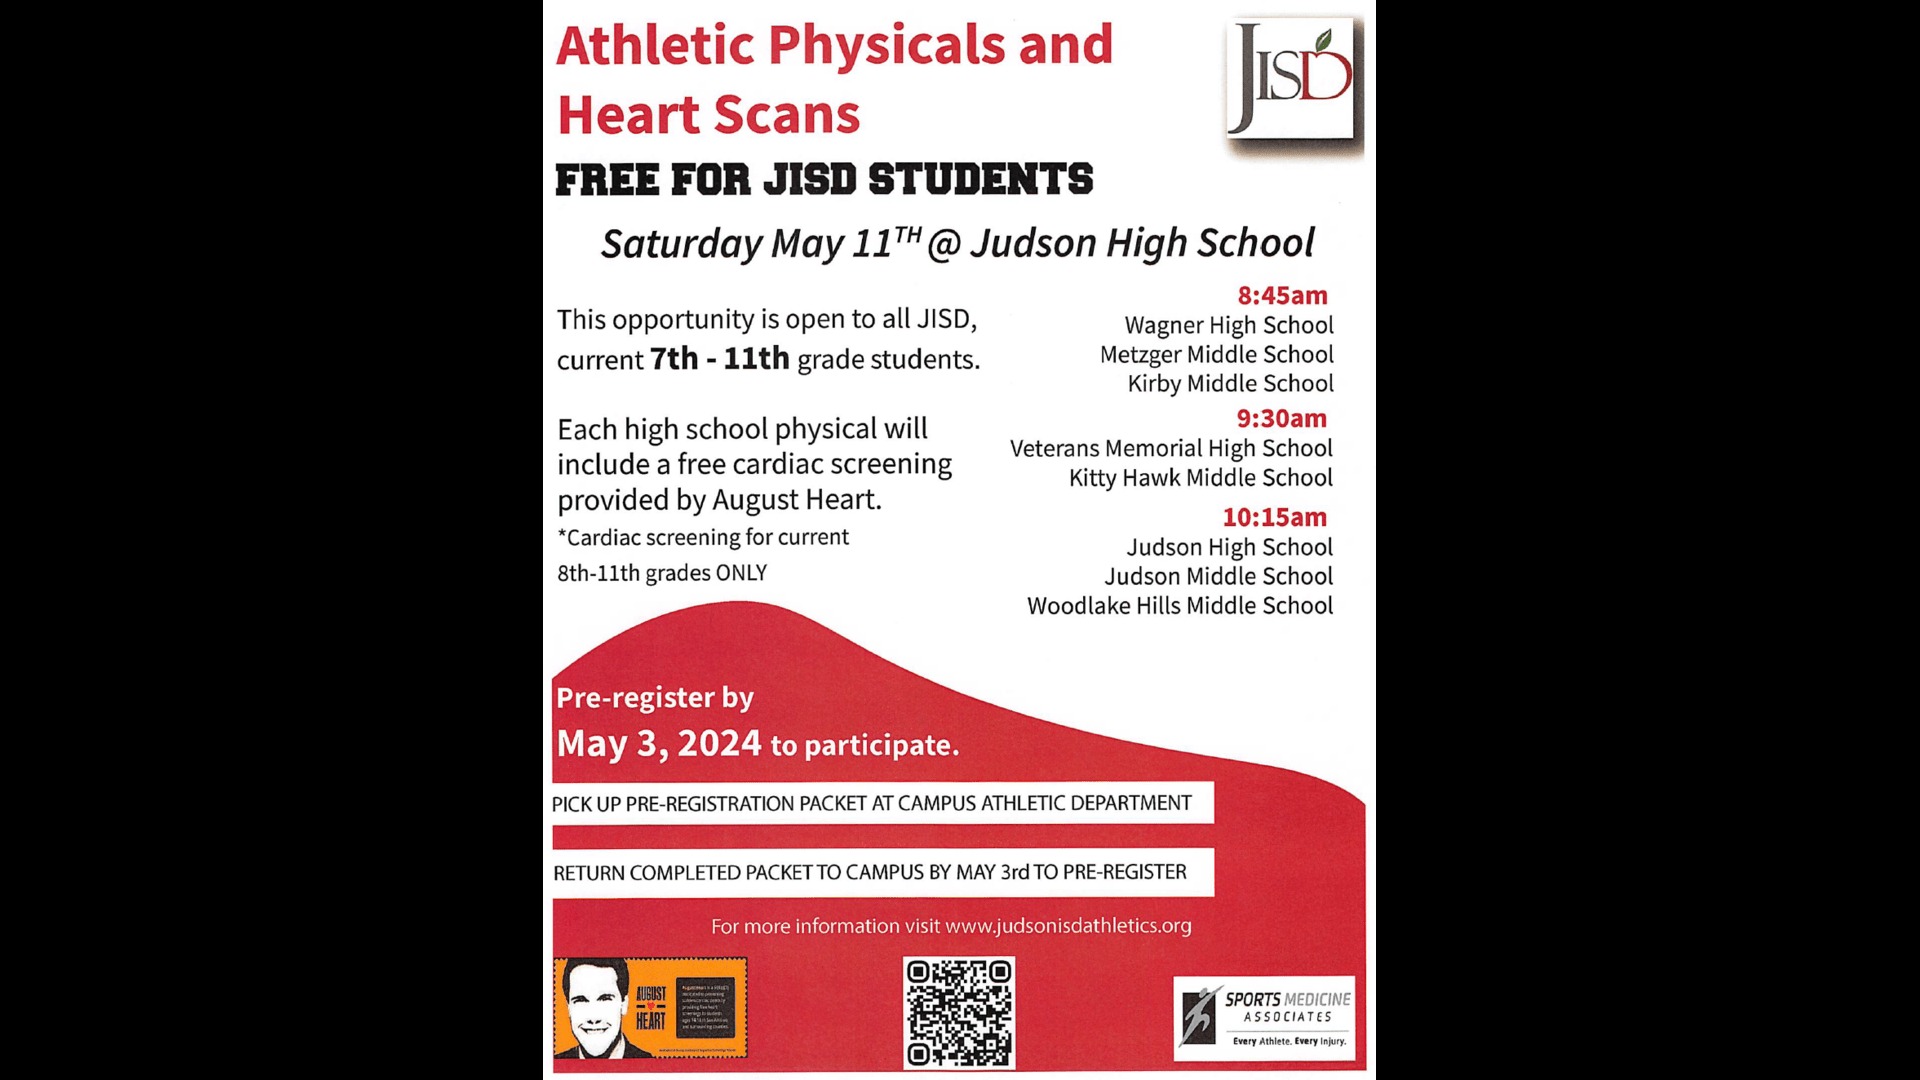 Woodlake Hills MSSlide 1 - Athletic Physicals - May 11th.